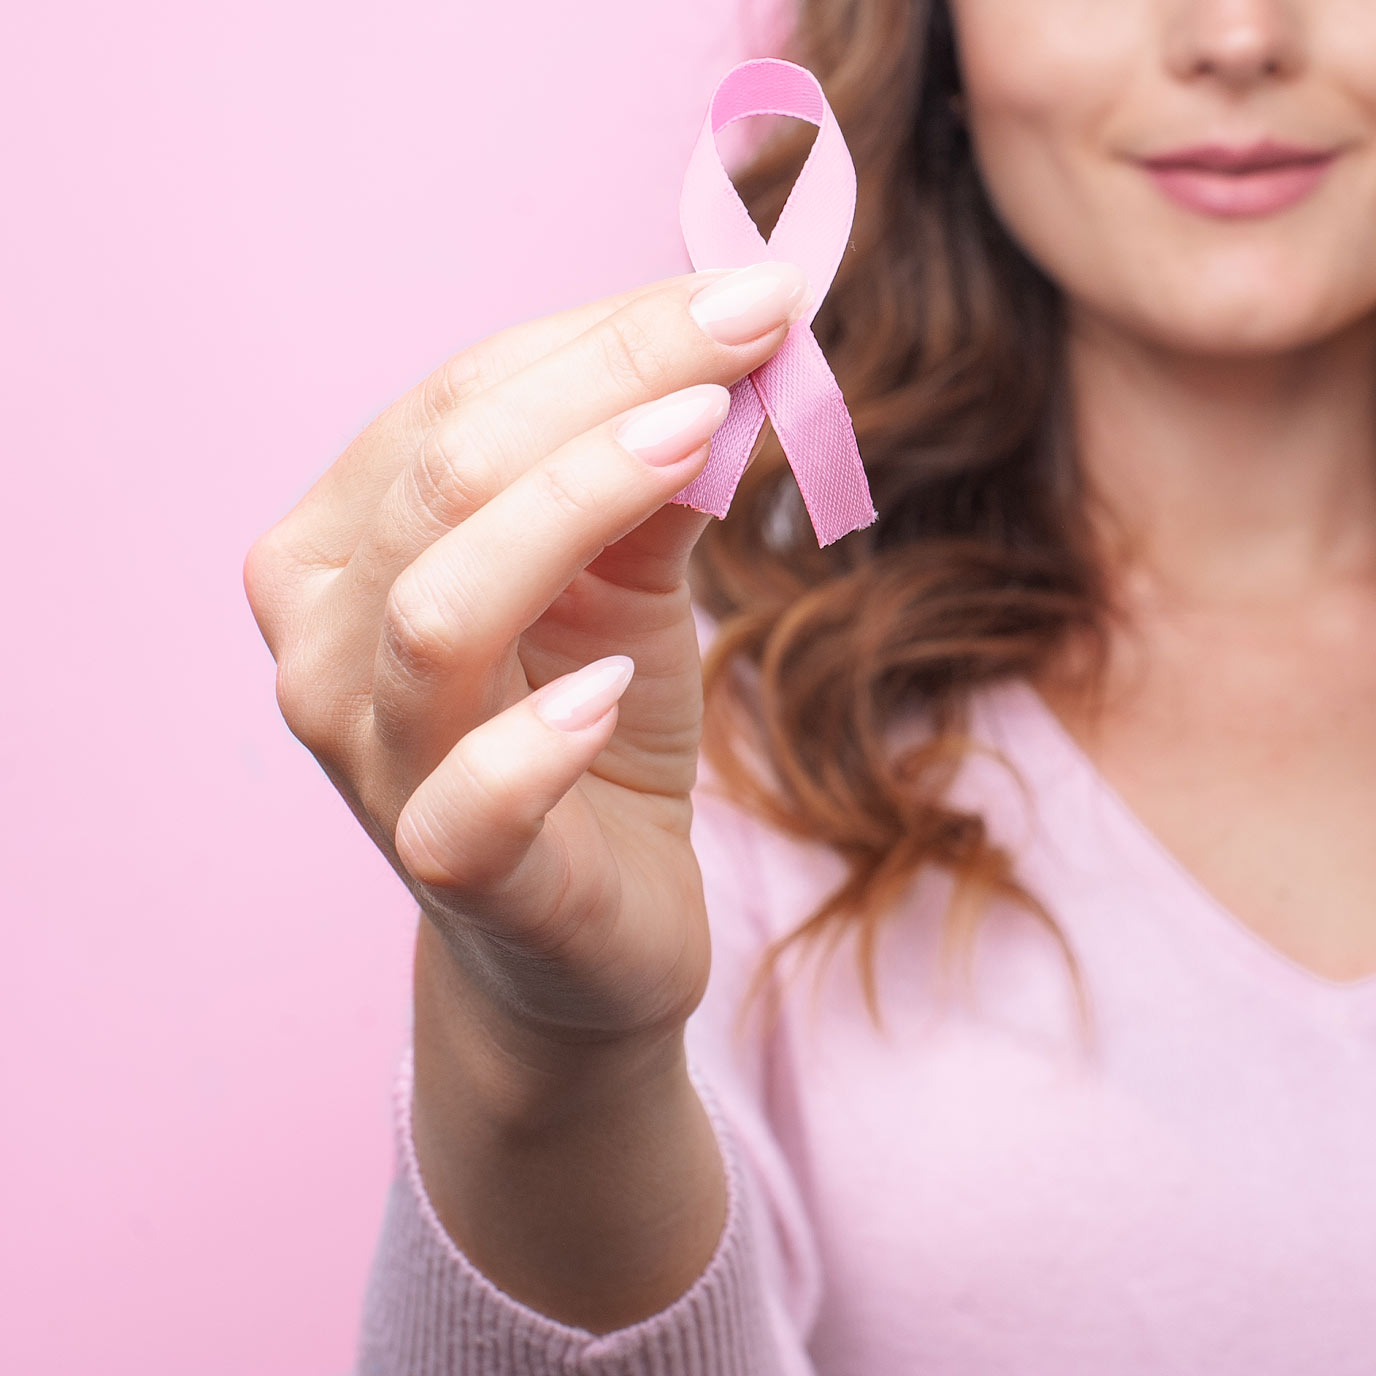 Read about breast cancer risk with HRT and why how you metabolise estrogen matters